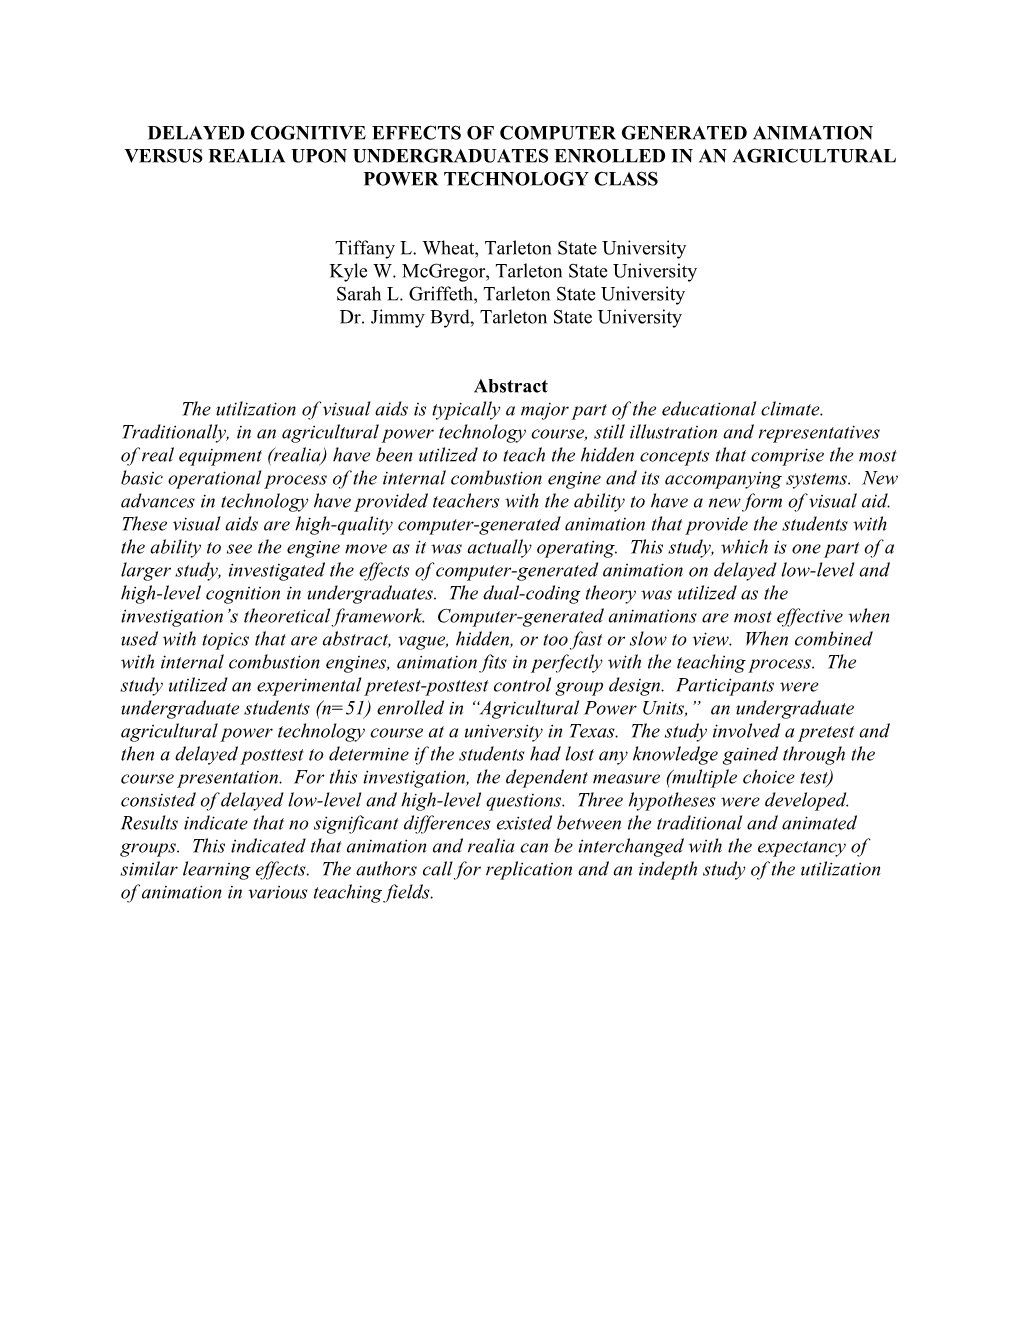 Immediate Cognitive Effects of Computer Generated Animation Versus Realia Upon Undergraduate